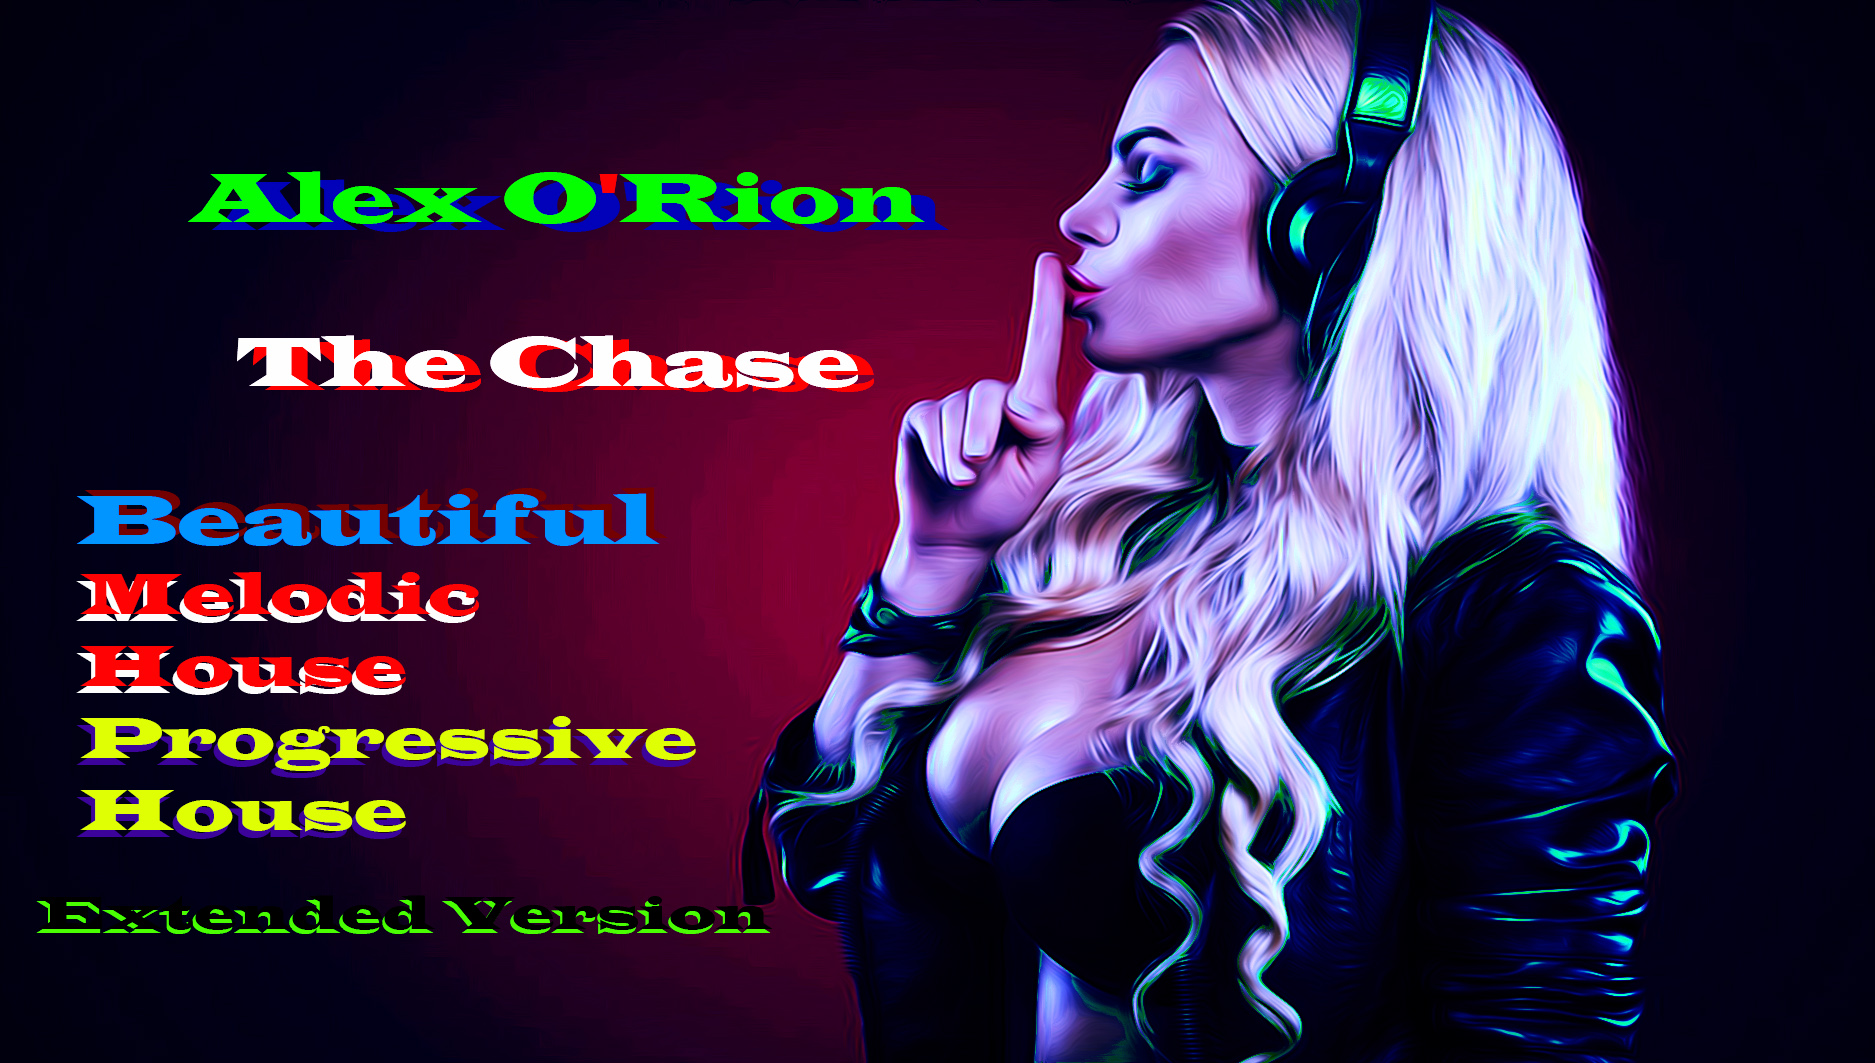 Alex O'Rion - The Chase (Melodic House&Progressive House,Extended Version)Красивый Мелодик Хаус .mp4